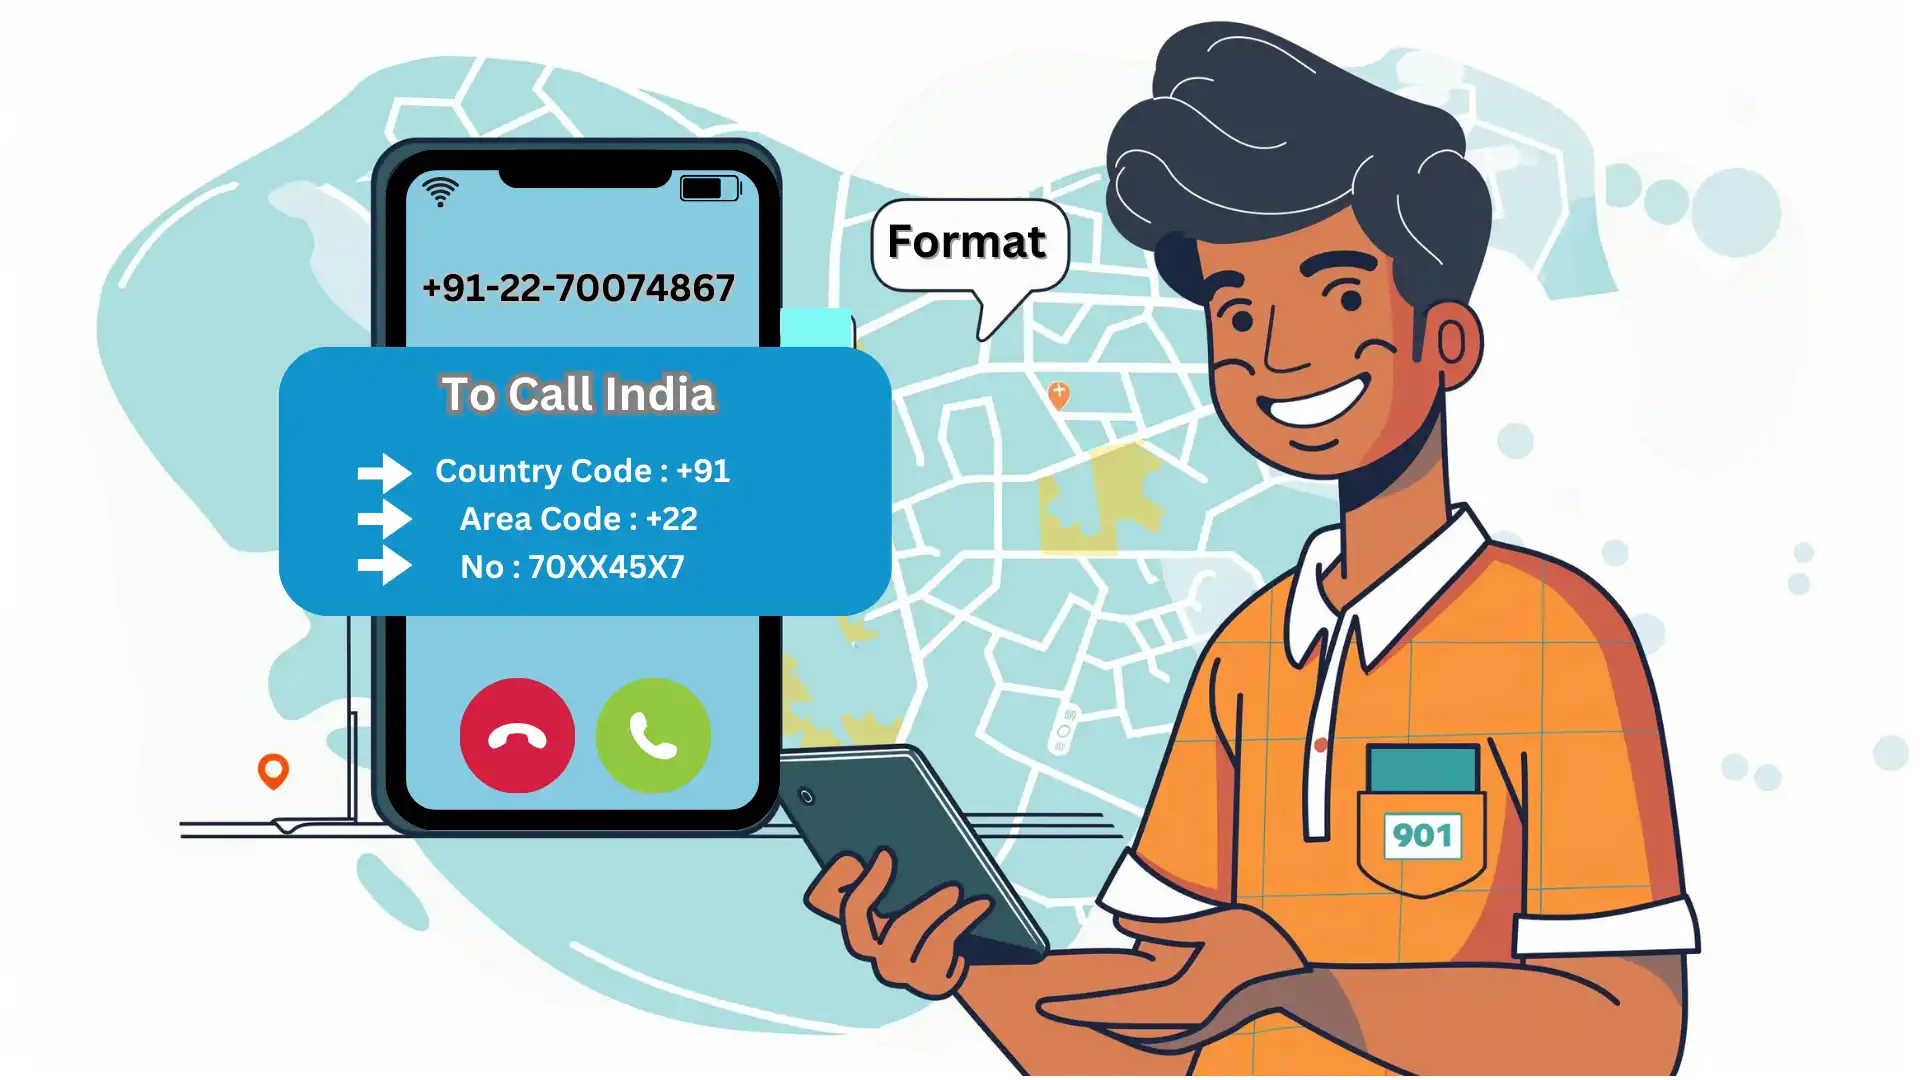 Step-by-Step Guide to Calling India